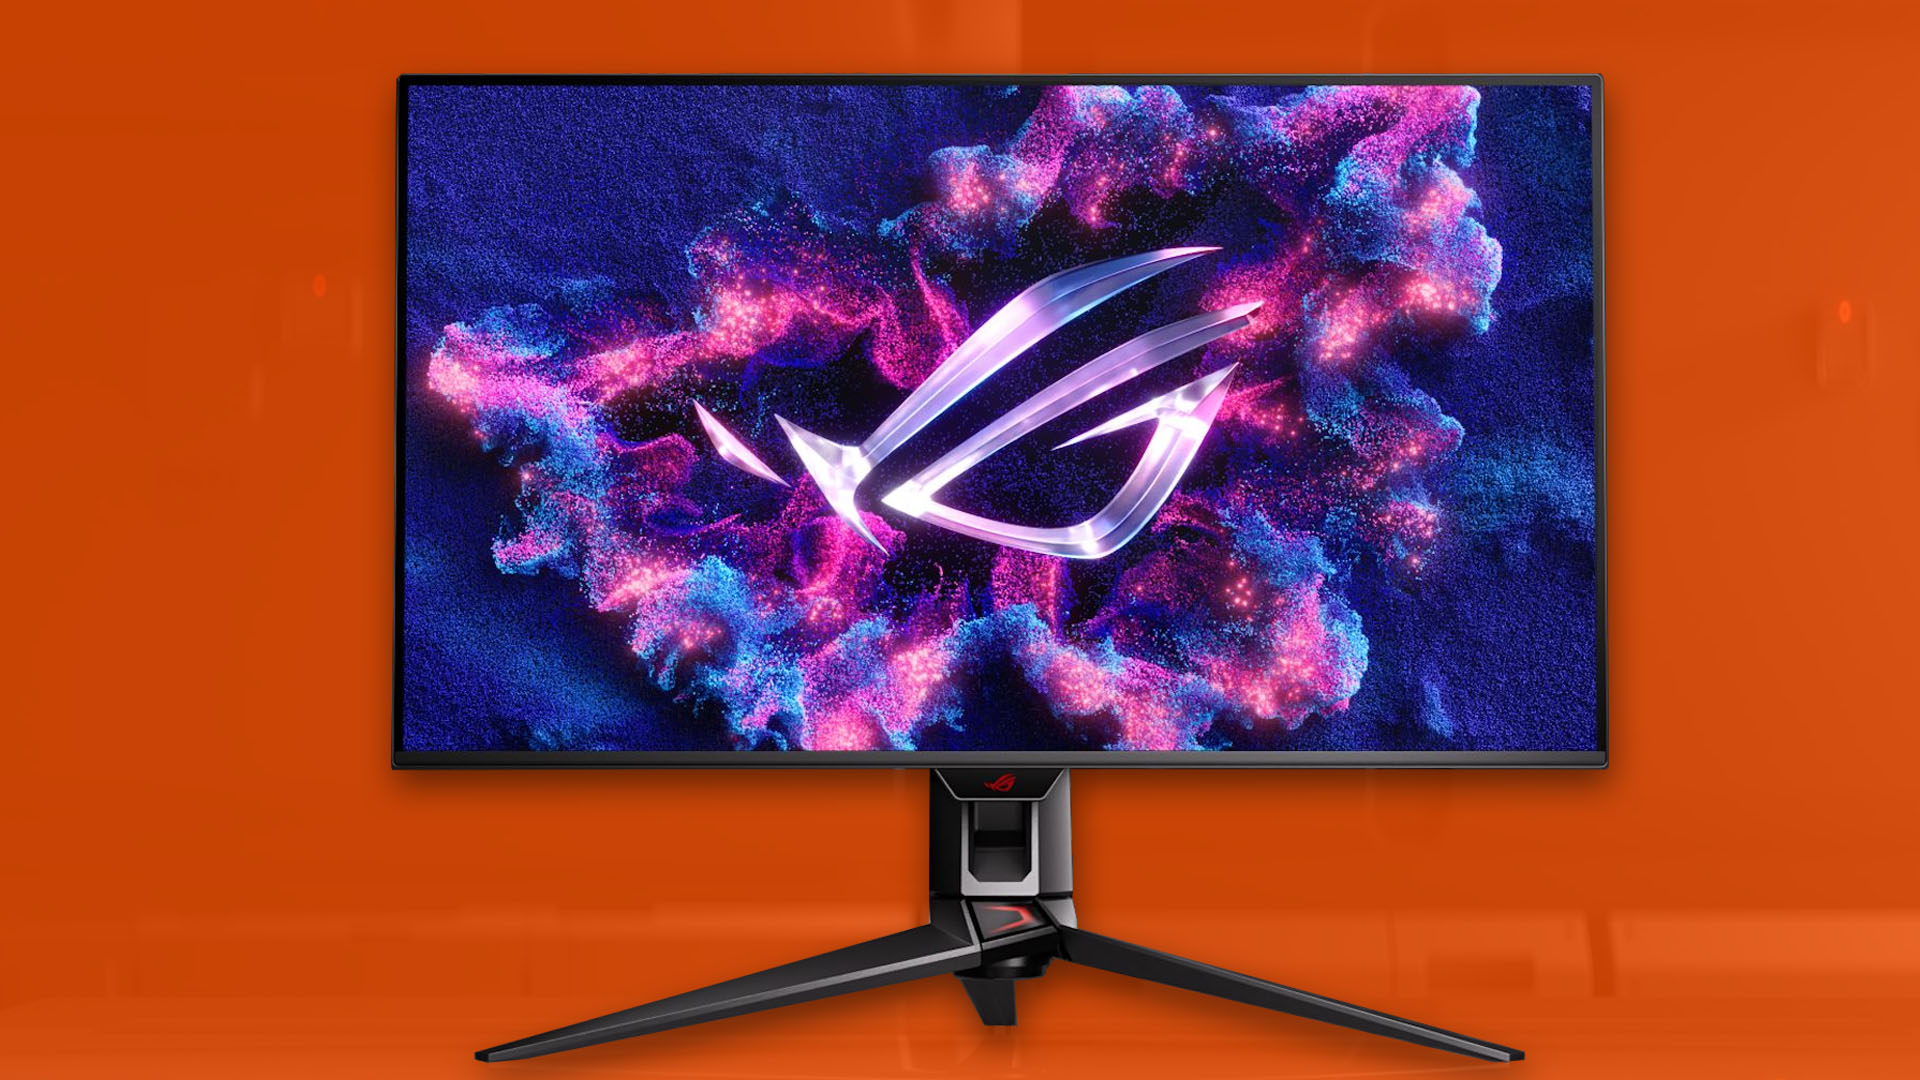 Asus' stunning new 240Hz 4K OLED gaming monitor has just gone on sale